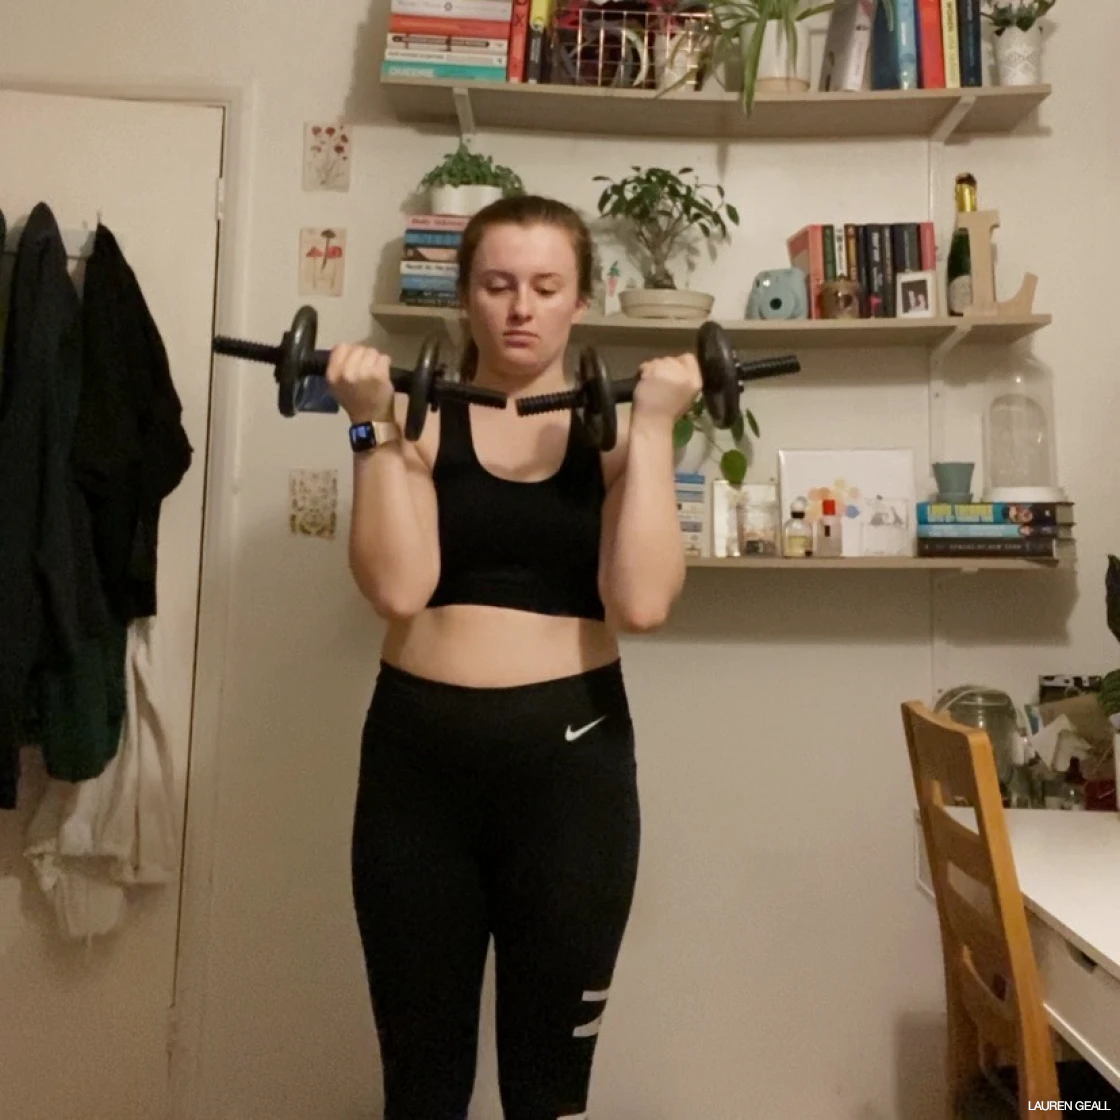 Lauren doing a strength training session at home